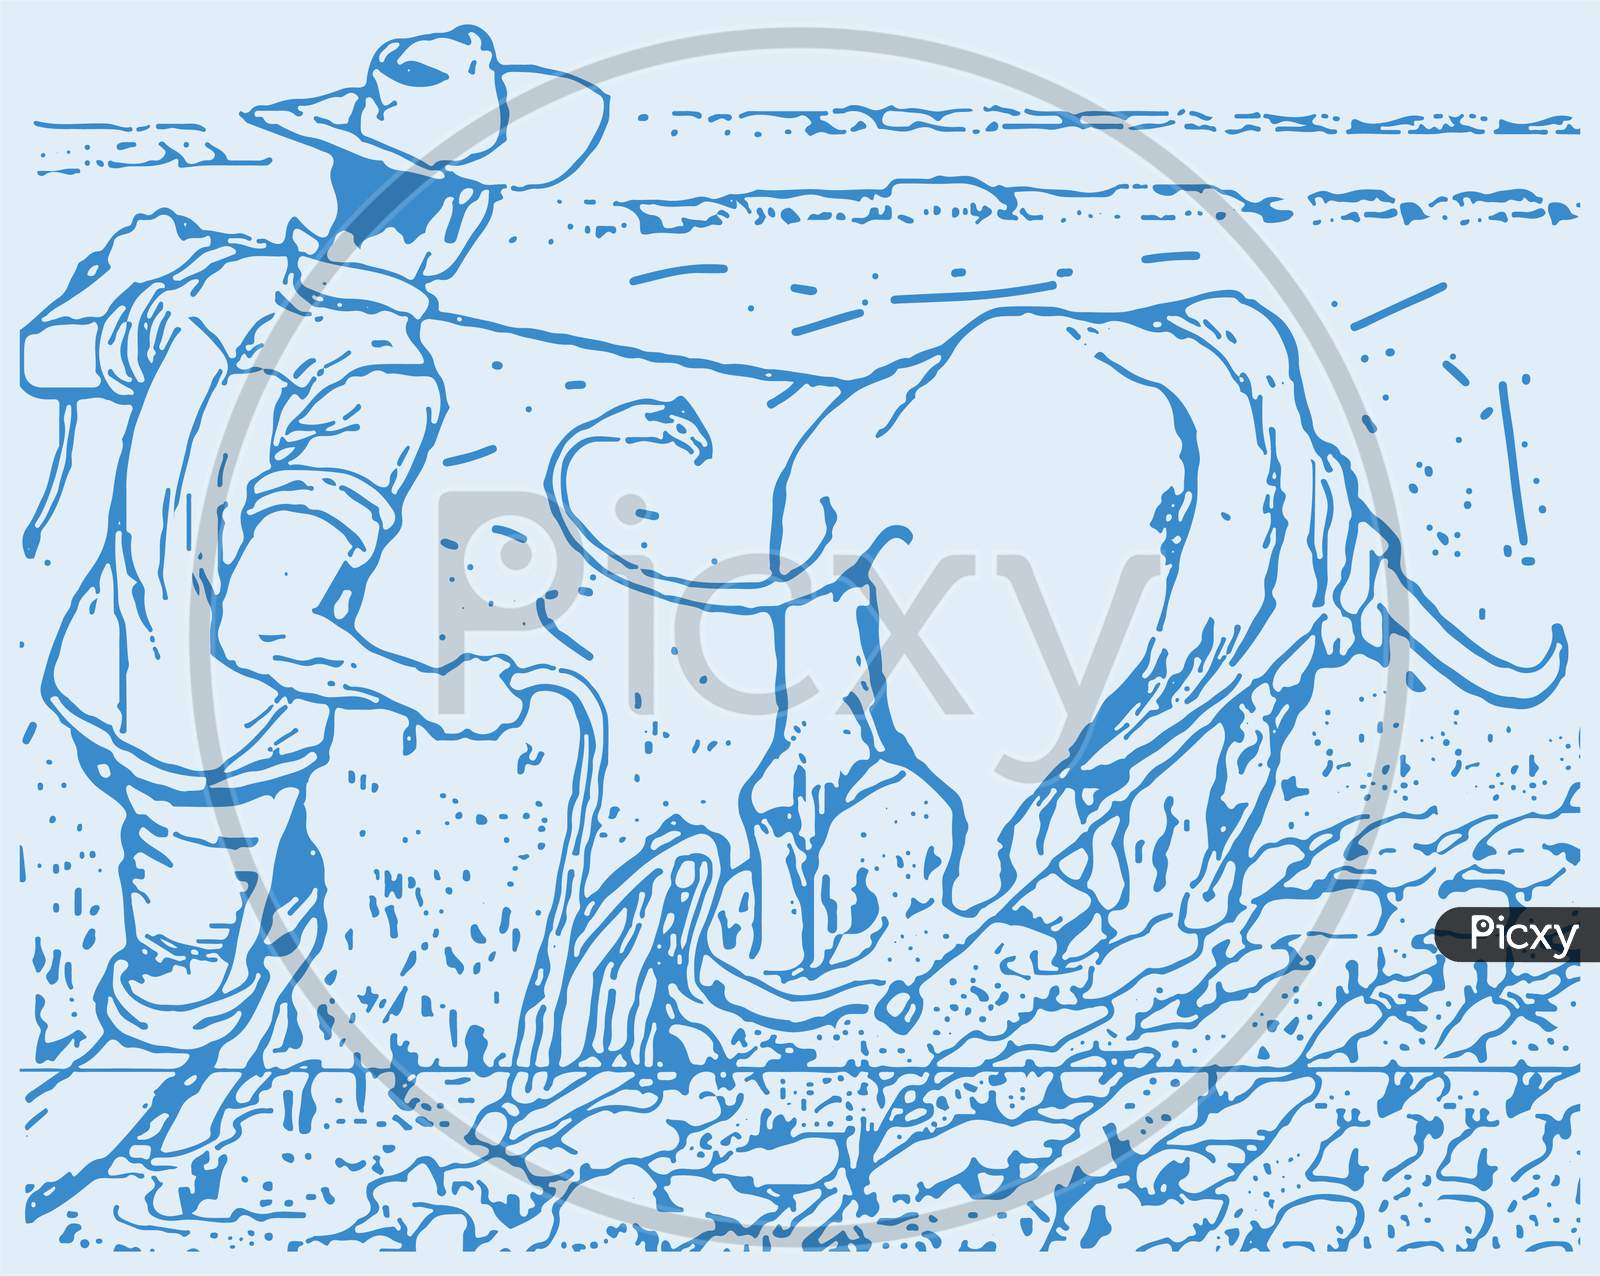 Image of Sketch Of Farmer Working With A Cow In A Agricultural Field And  Village Or Rural Environment Outline Editable IllustrationCF562094Picxy